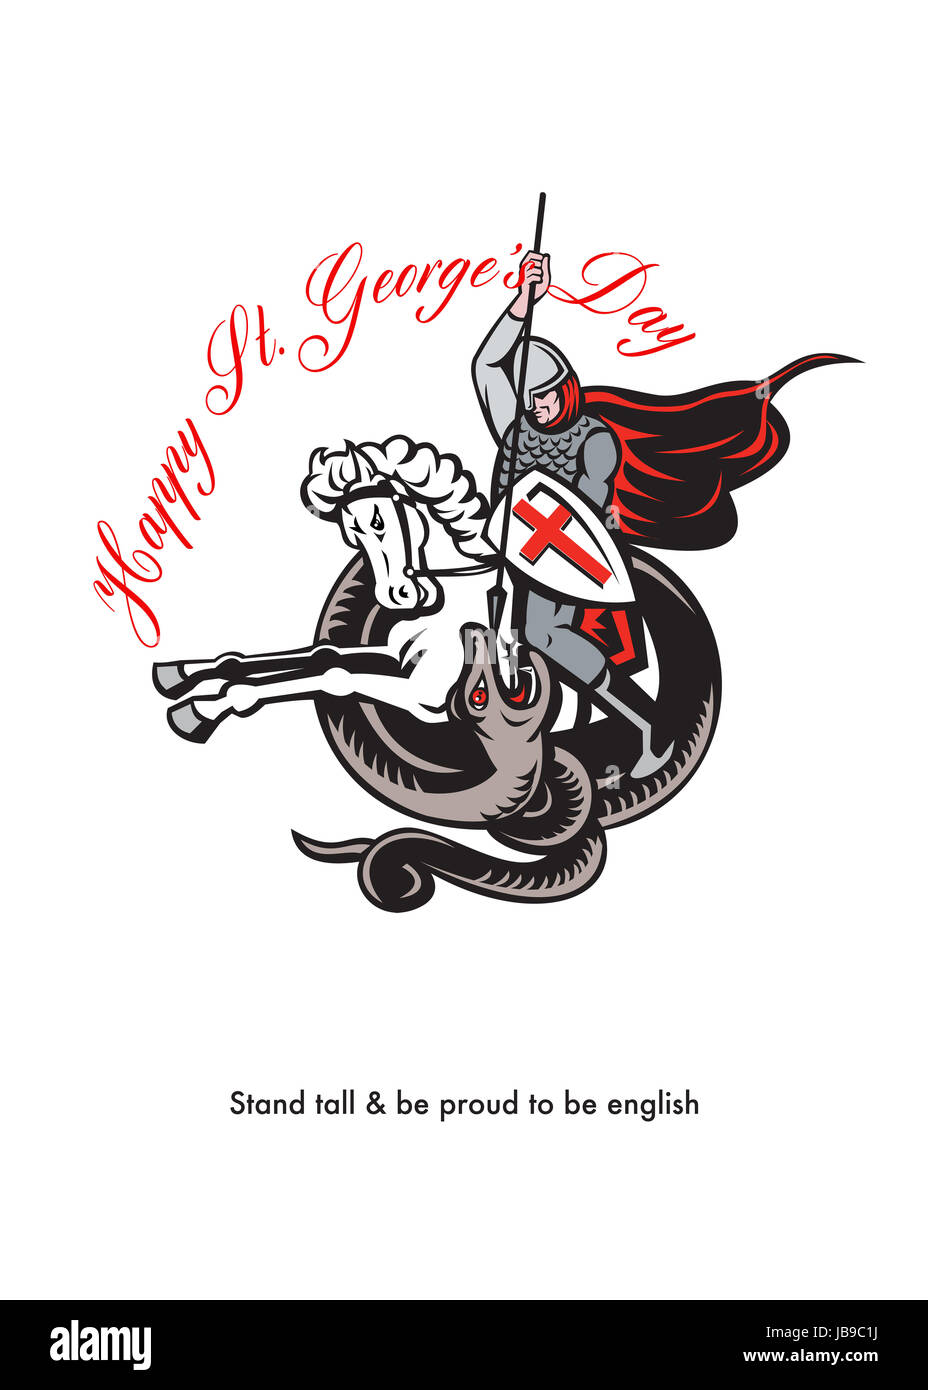 Poster greeting card Illustration of knight in full armor fighting a dragon with England English flag in background done in retro style with words Happy St. George's Day Stand Tall and Proud to be English. Stock Photo